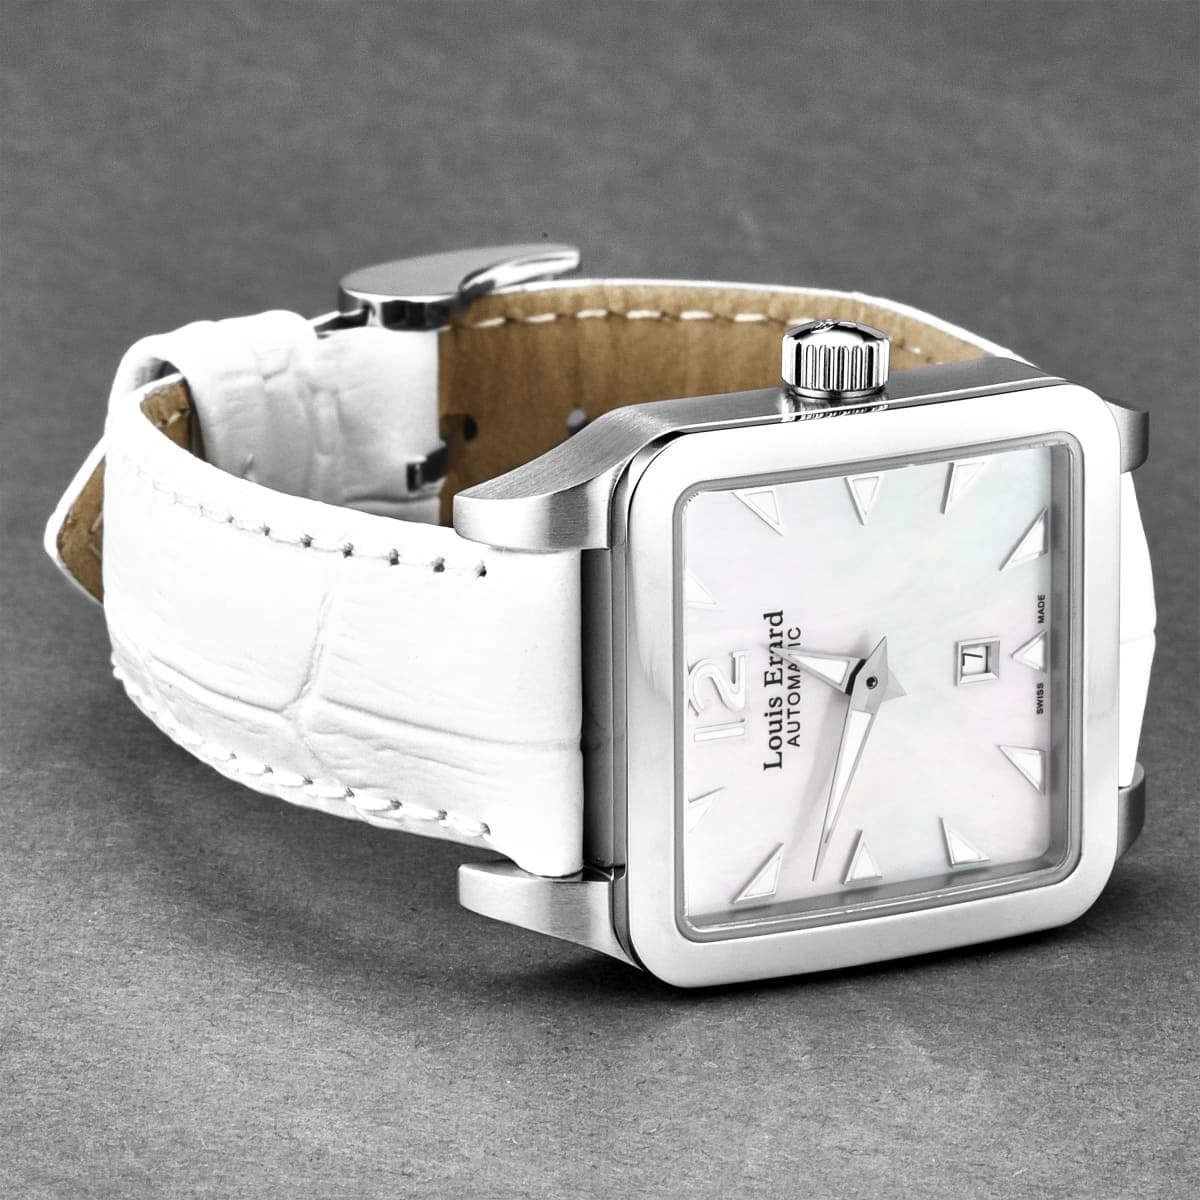 Louis Erard Women’s ’Emotion’ White Mother of Pearl Dial Leather Strap Automatic Watch 20700AA04.BDC61 - On sale